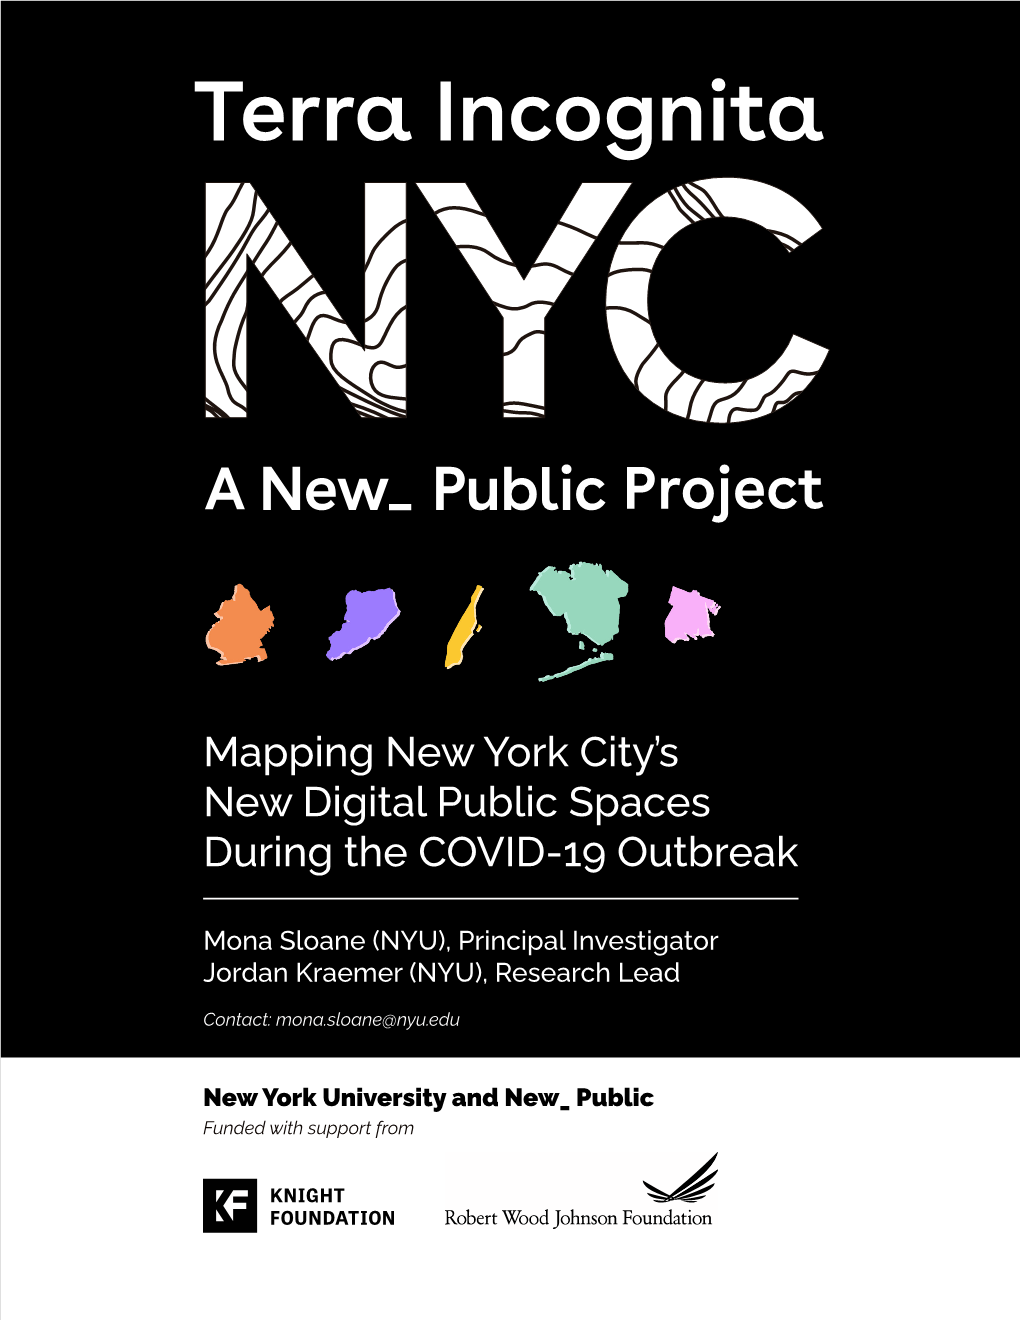 Terra Incognita NYC Acknowledgements to the Craft of Digital Ethnography and That of Writing